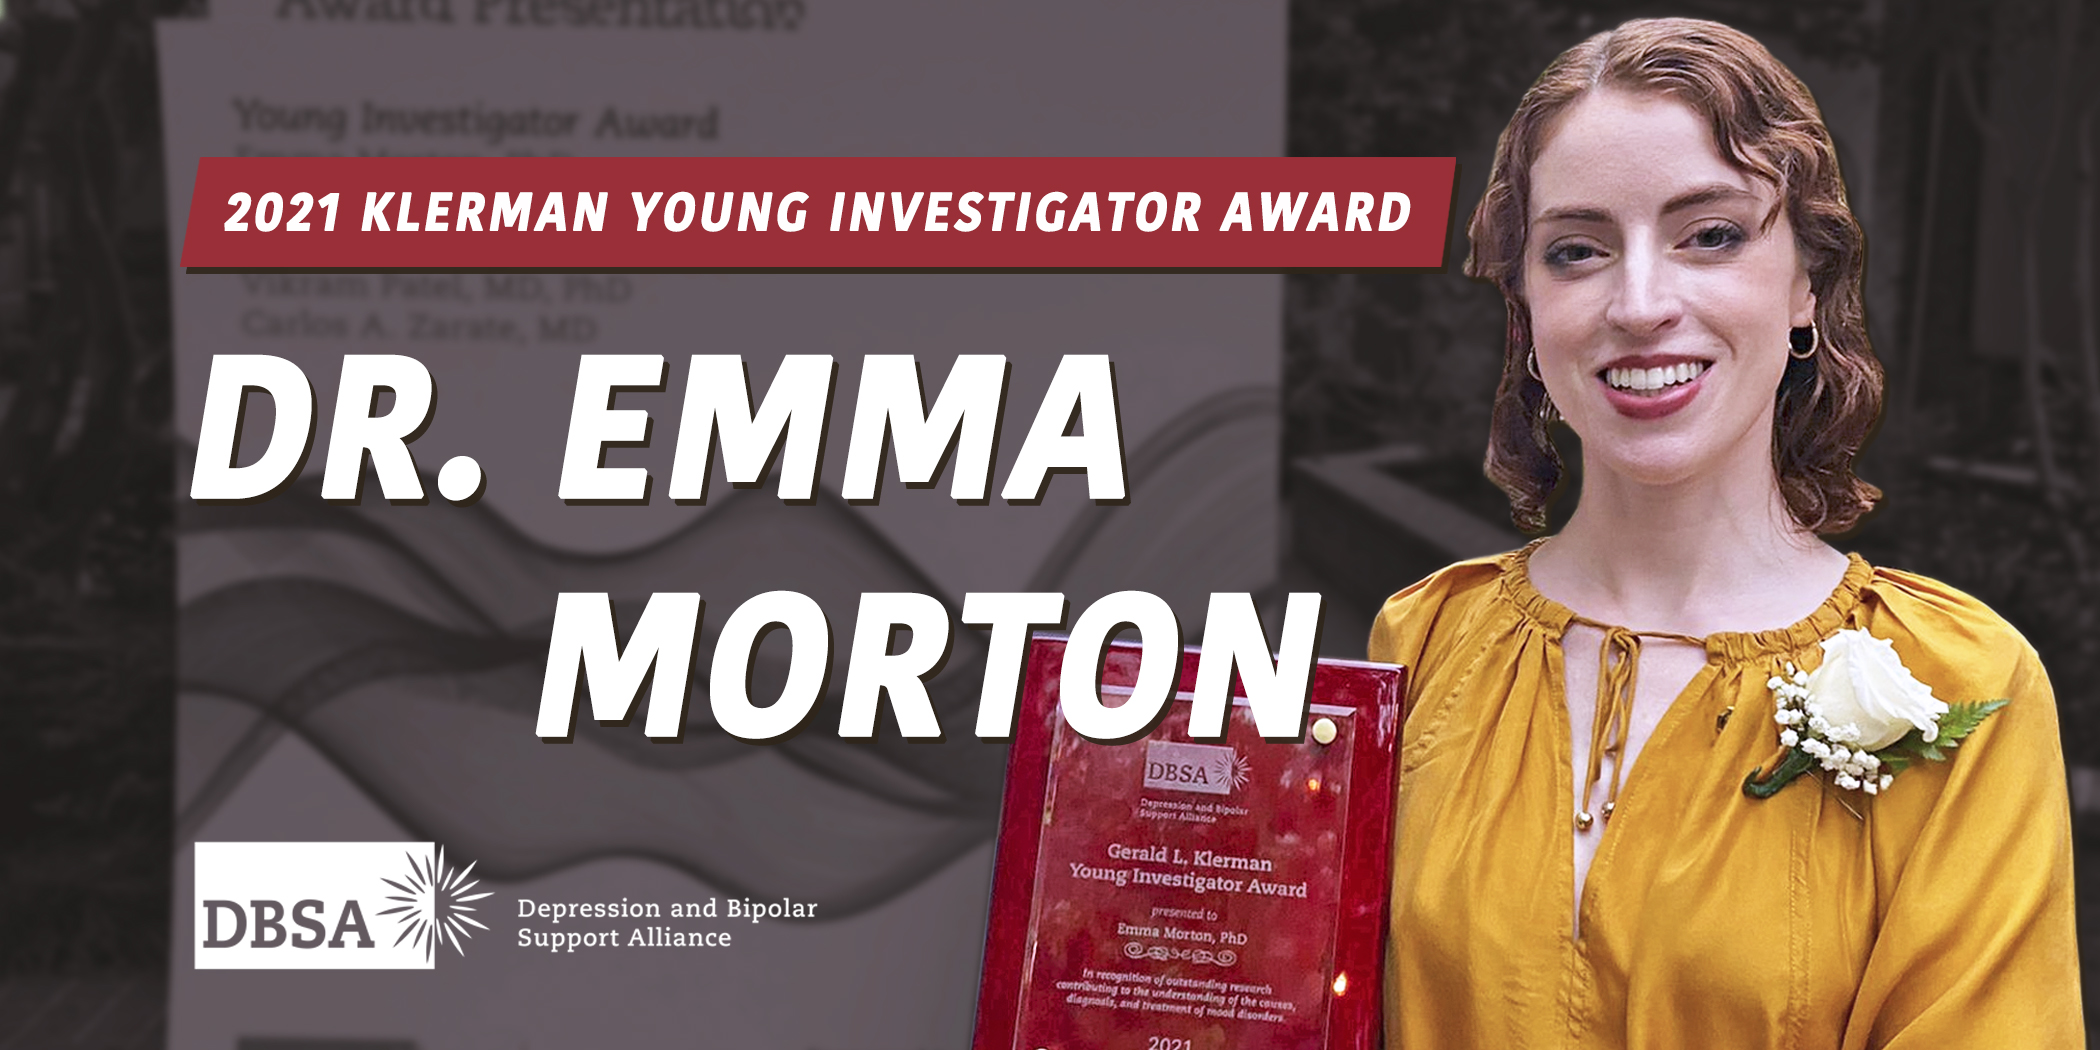 Congratulations to Dr. Emma Morton for winning the Gerald L. Klerman Young Investigator Award!